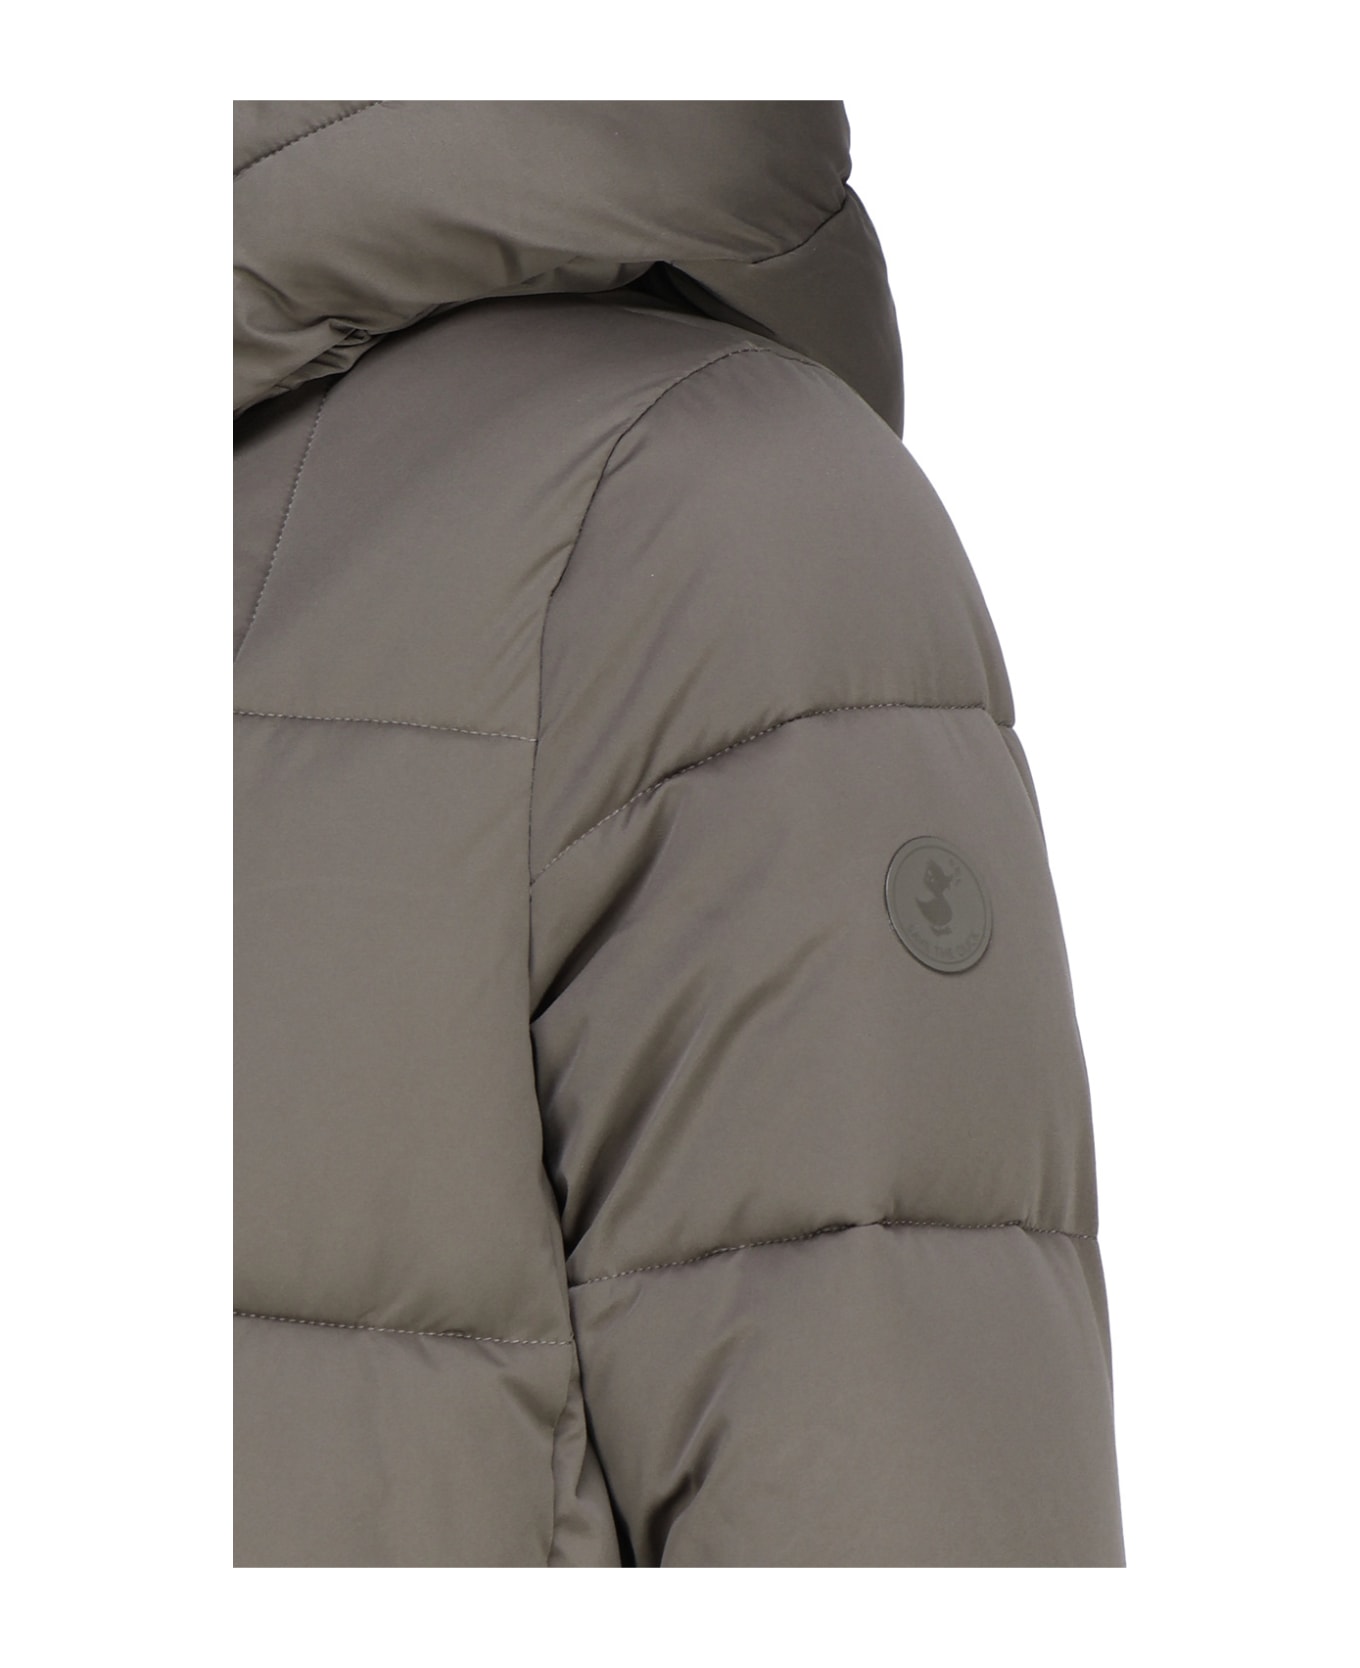 Save the Duck Padded Coat With Hood